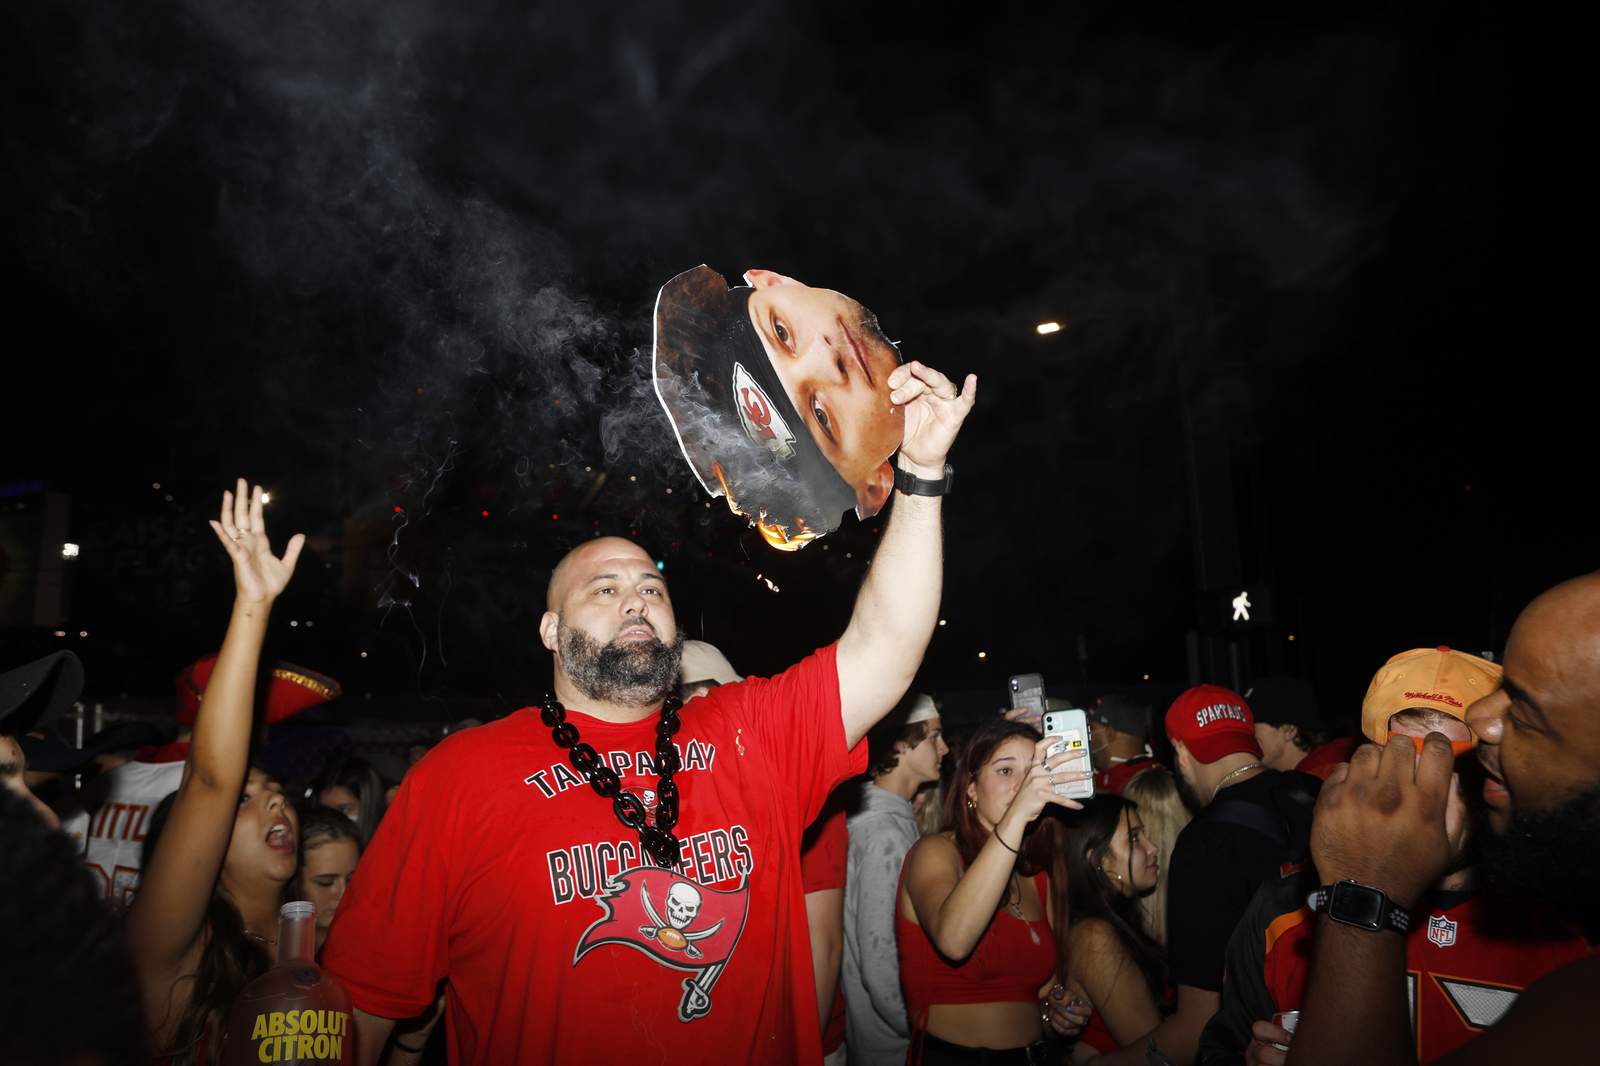 Throngs of maskless fans celebrate Tampa’s Super Bowl win